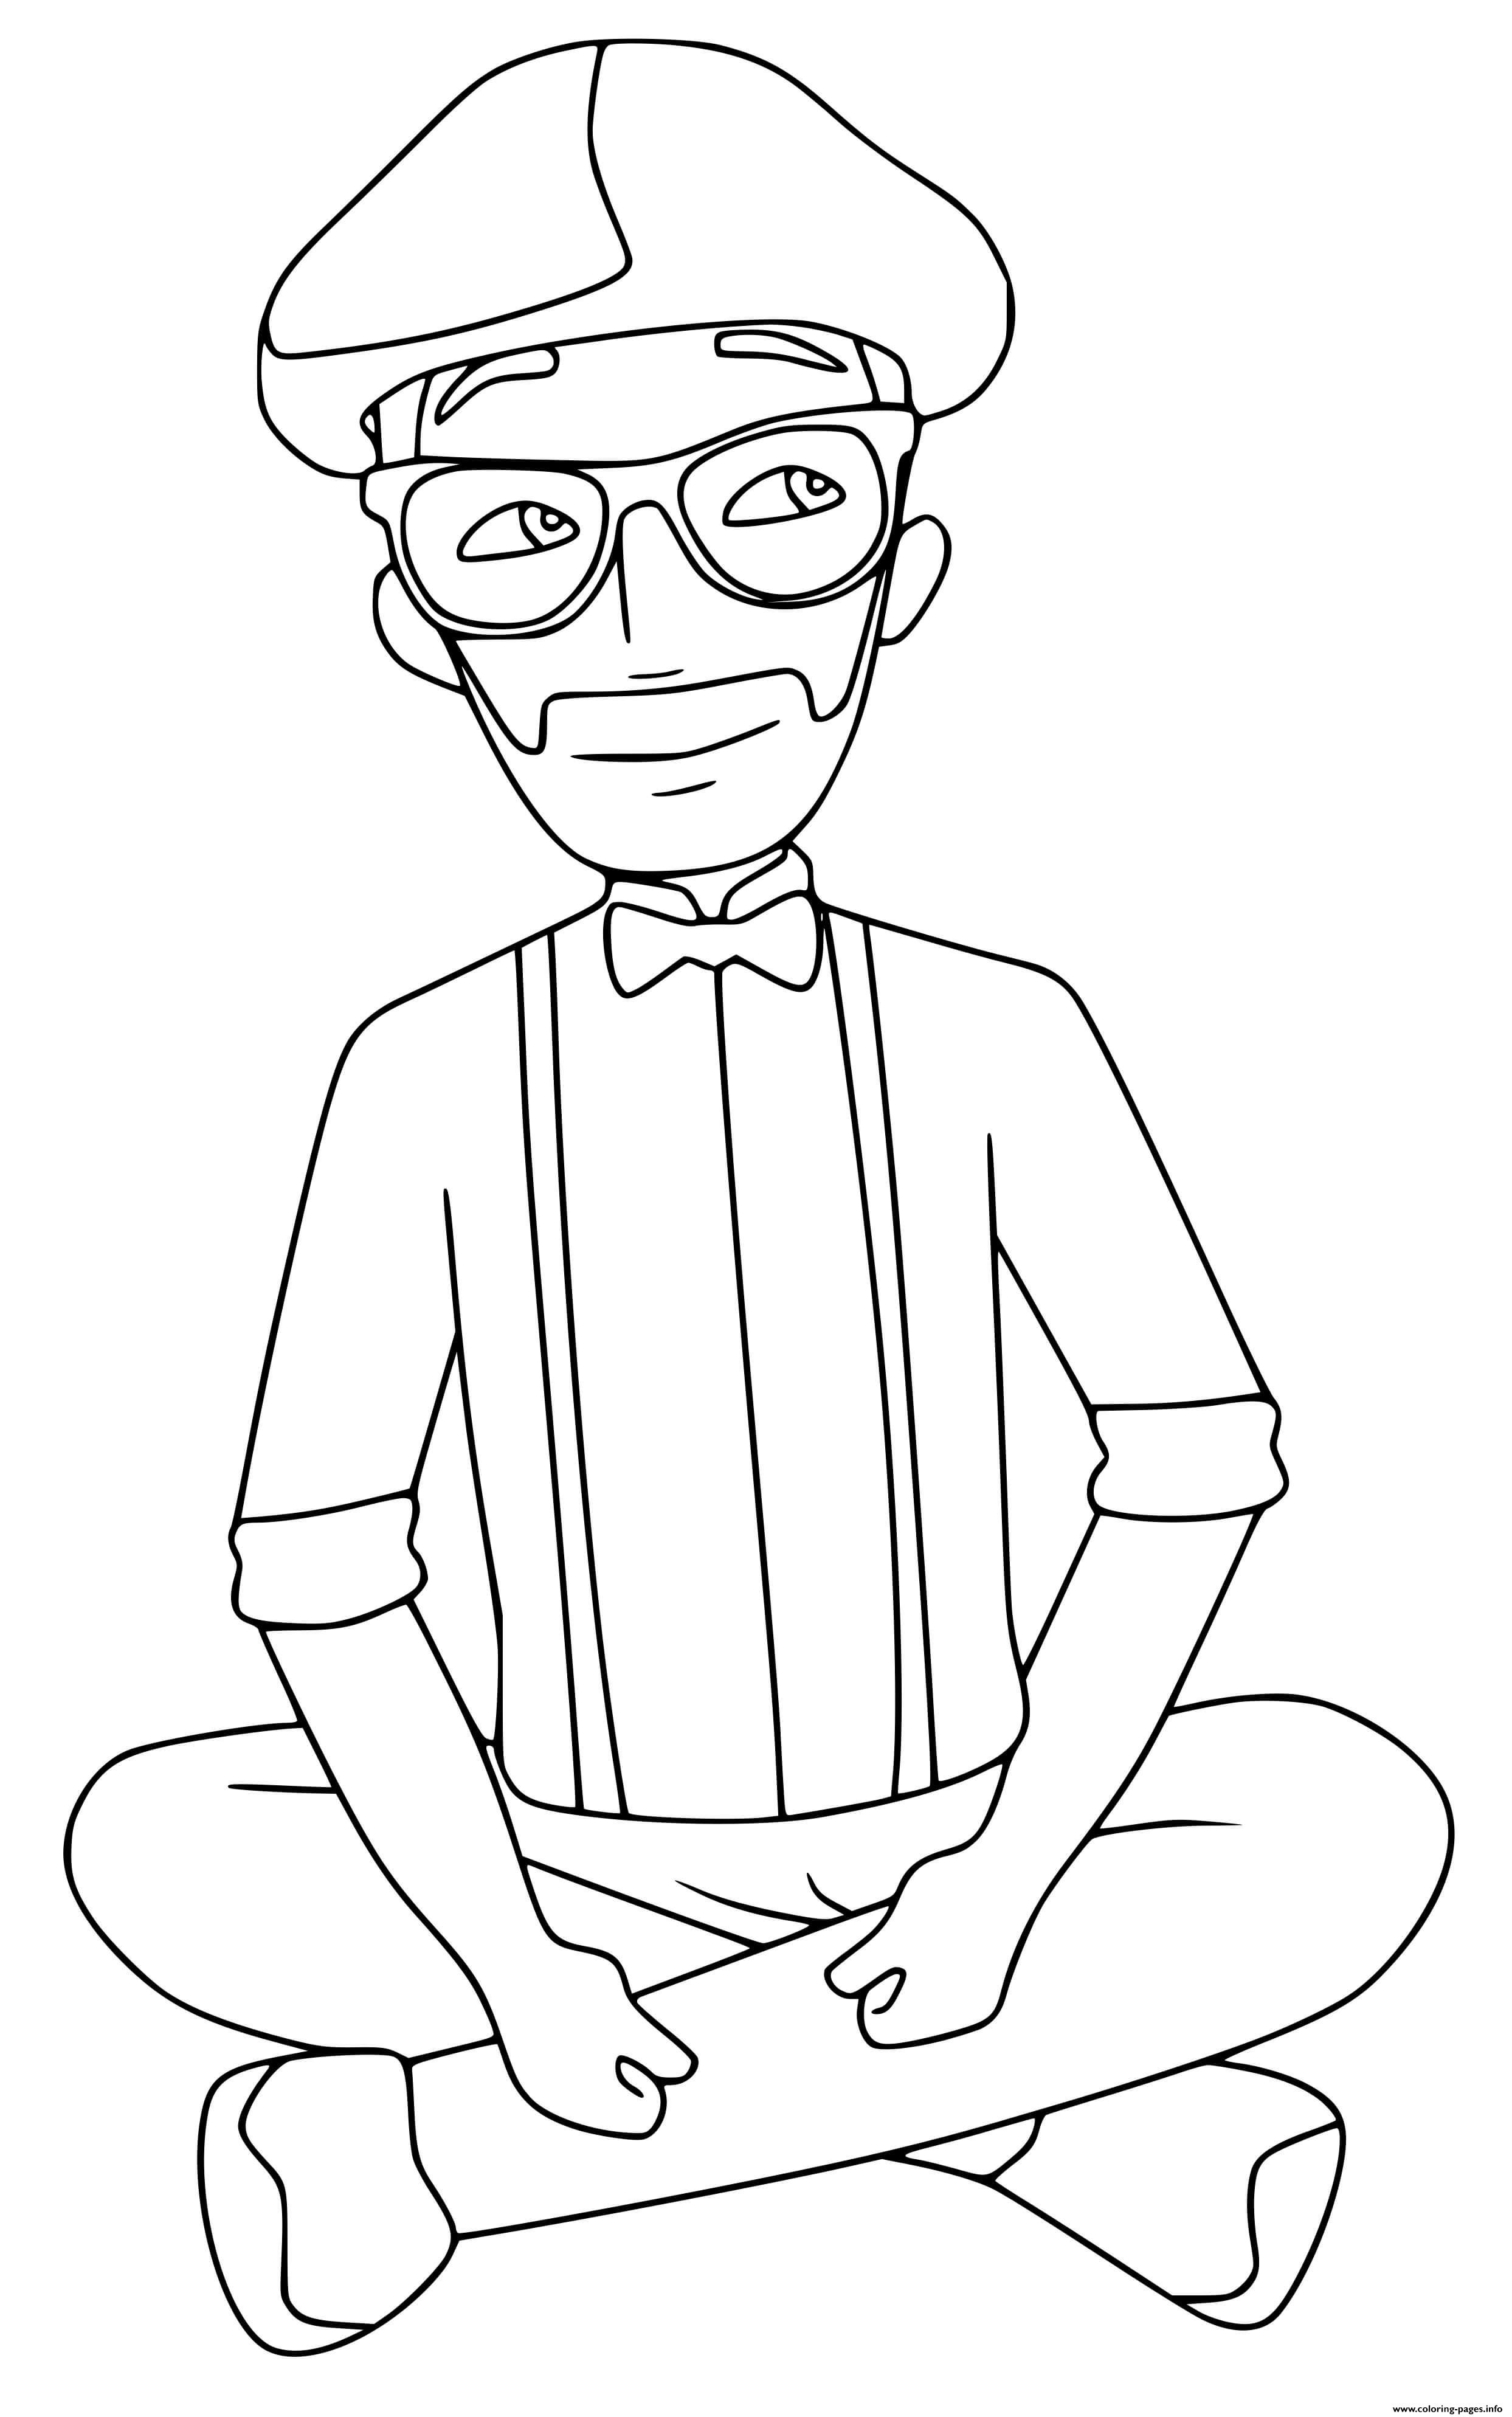 Download Blippi Blue And Orange Outfit Coloring Pages Printable